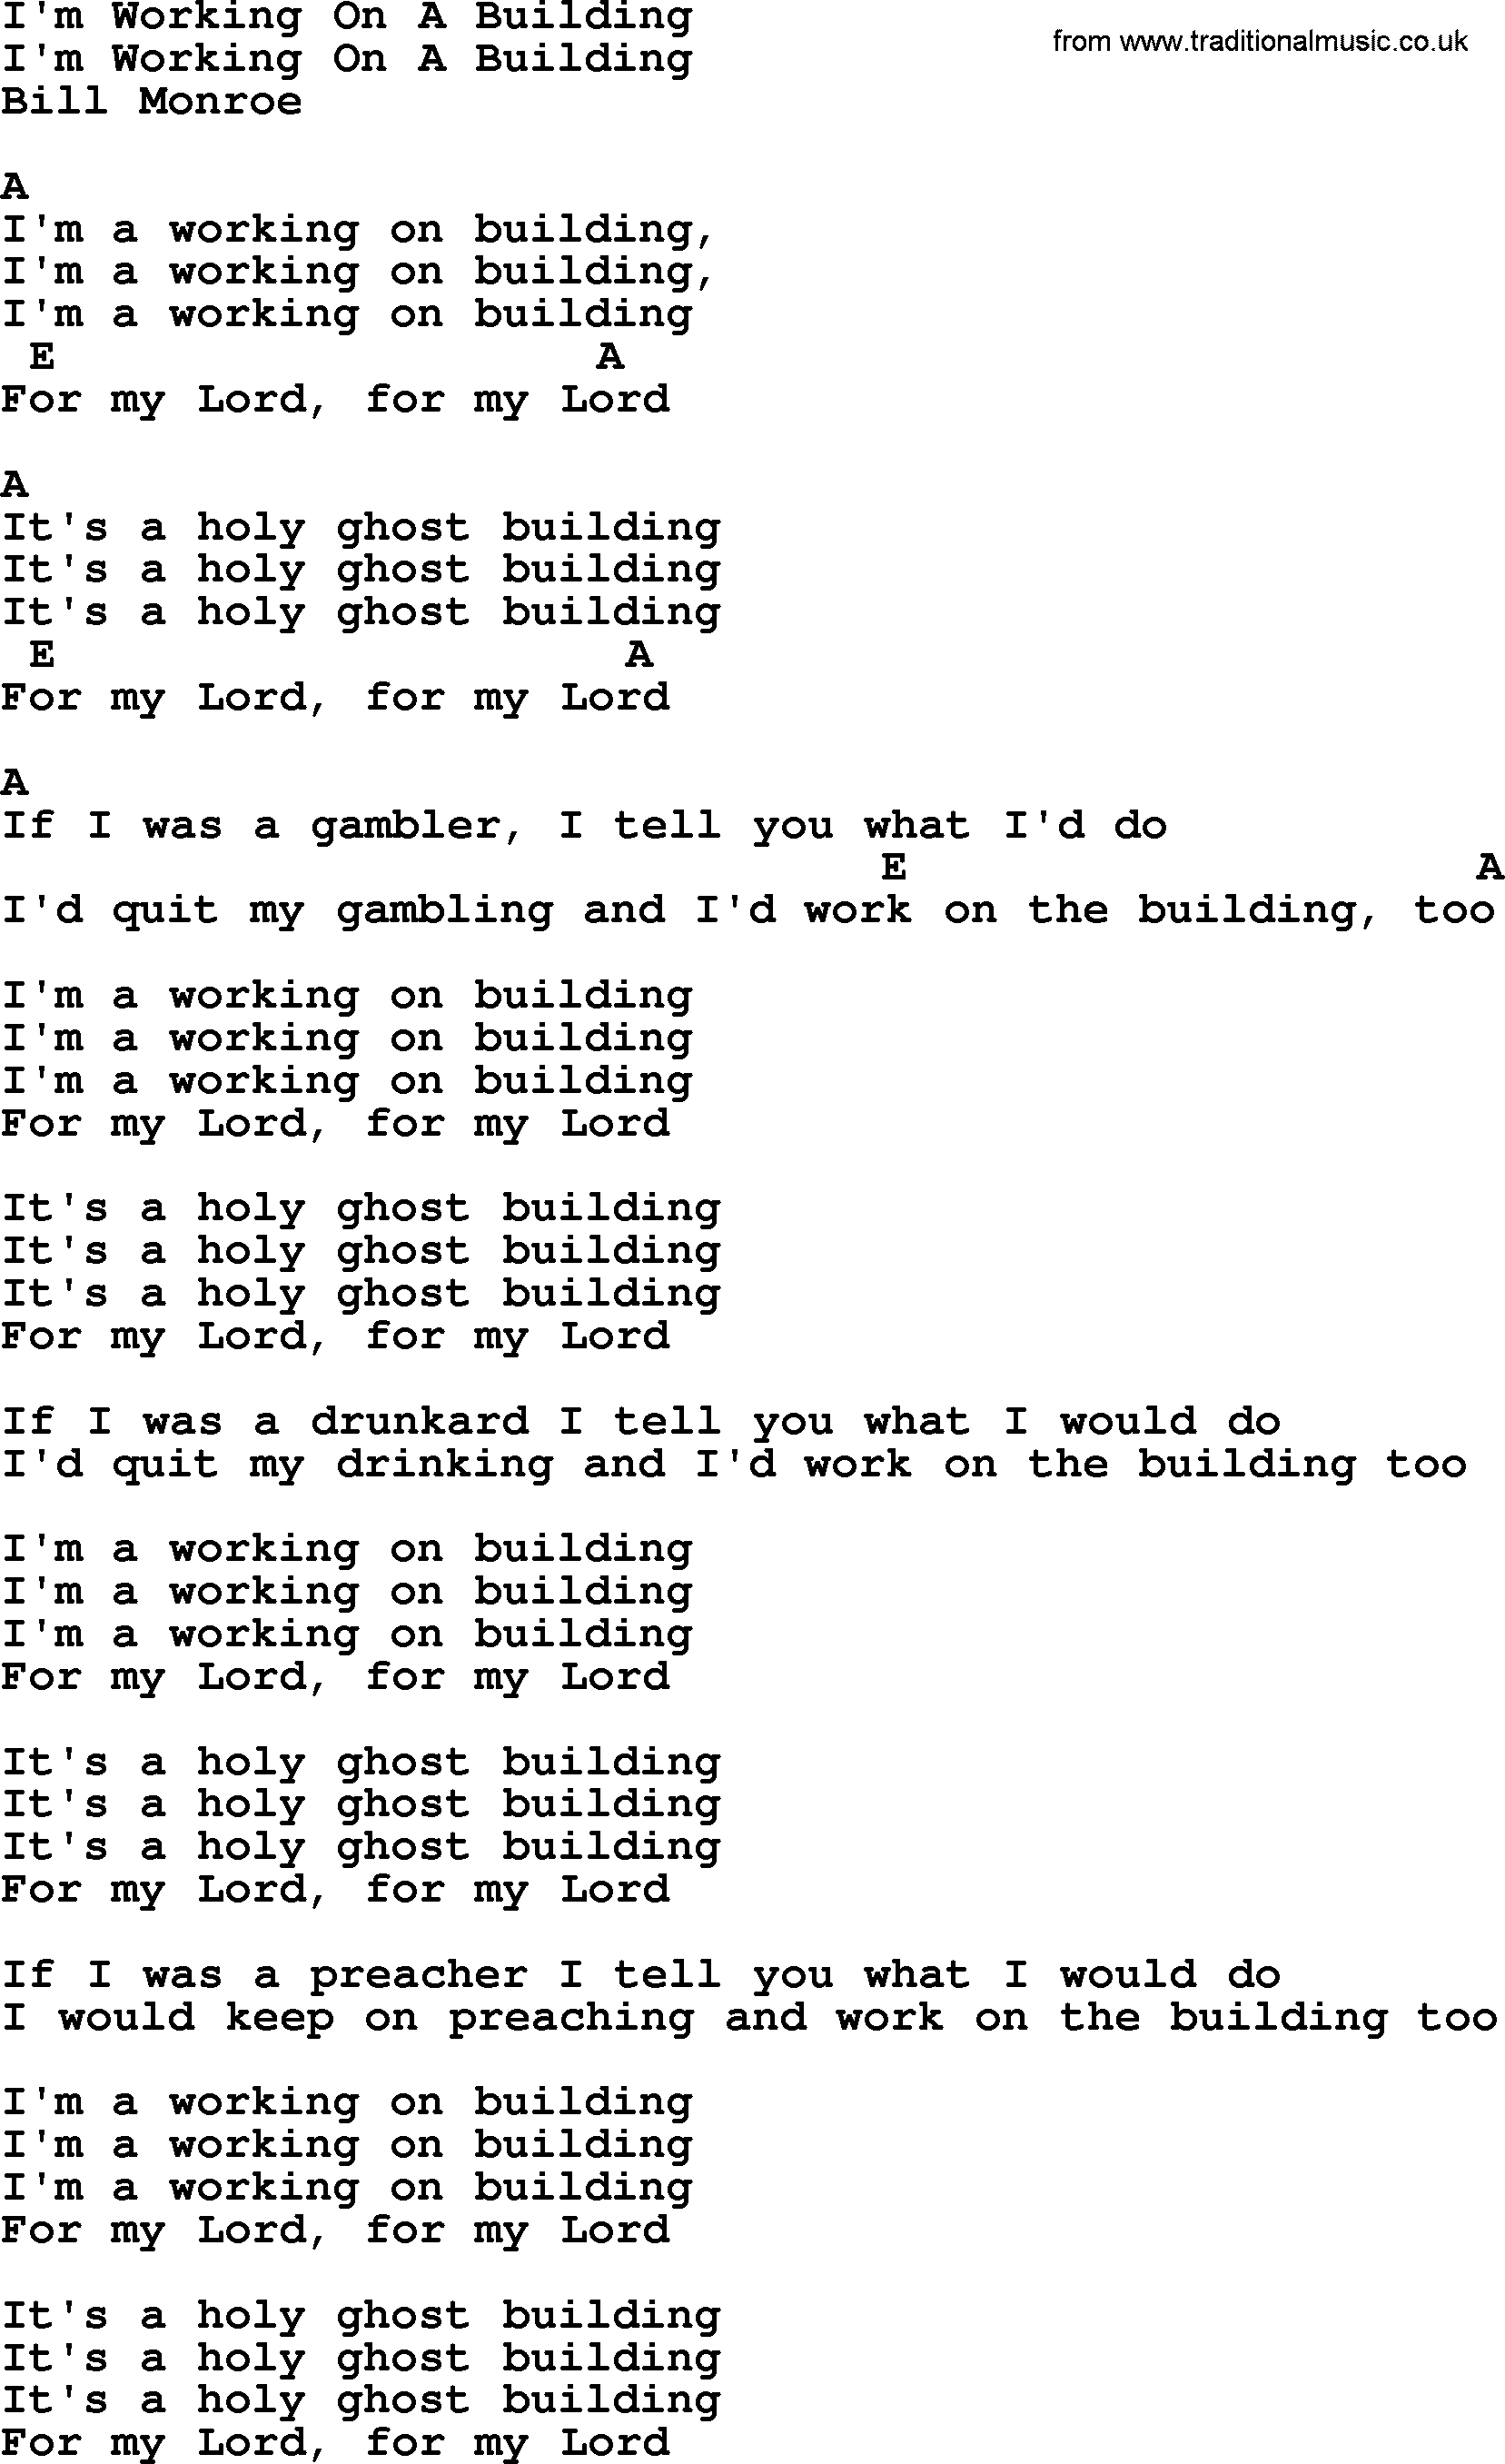 Bluegrass song: I'm Working On A Building, lyrics and chords